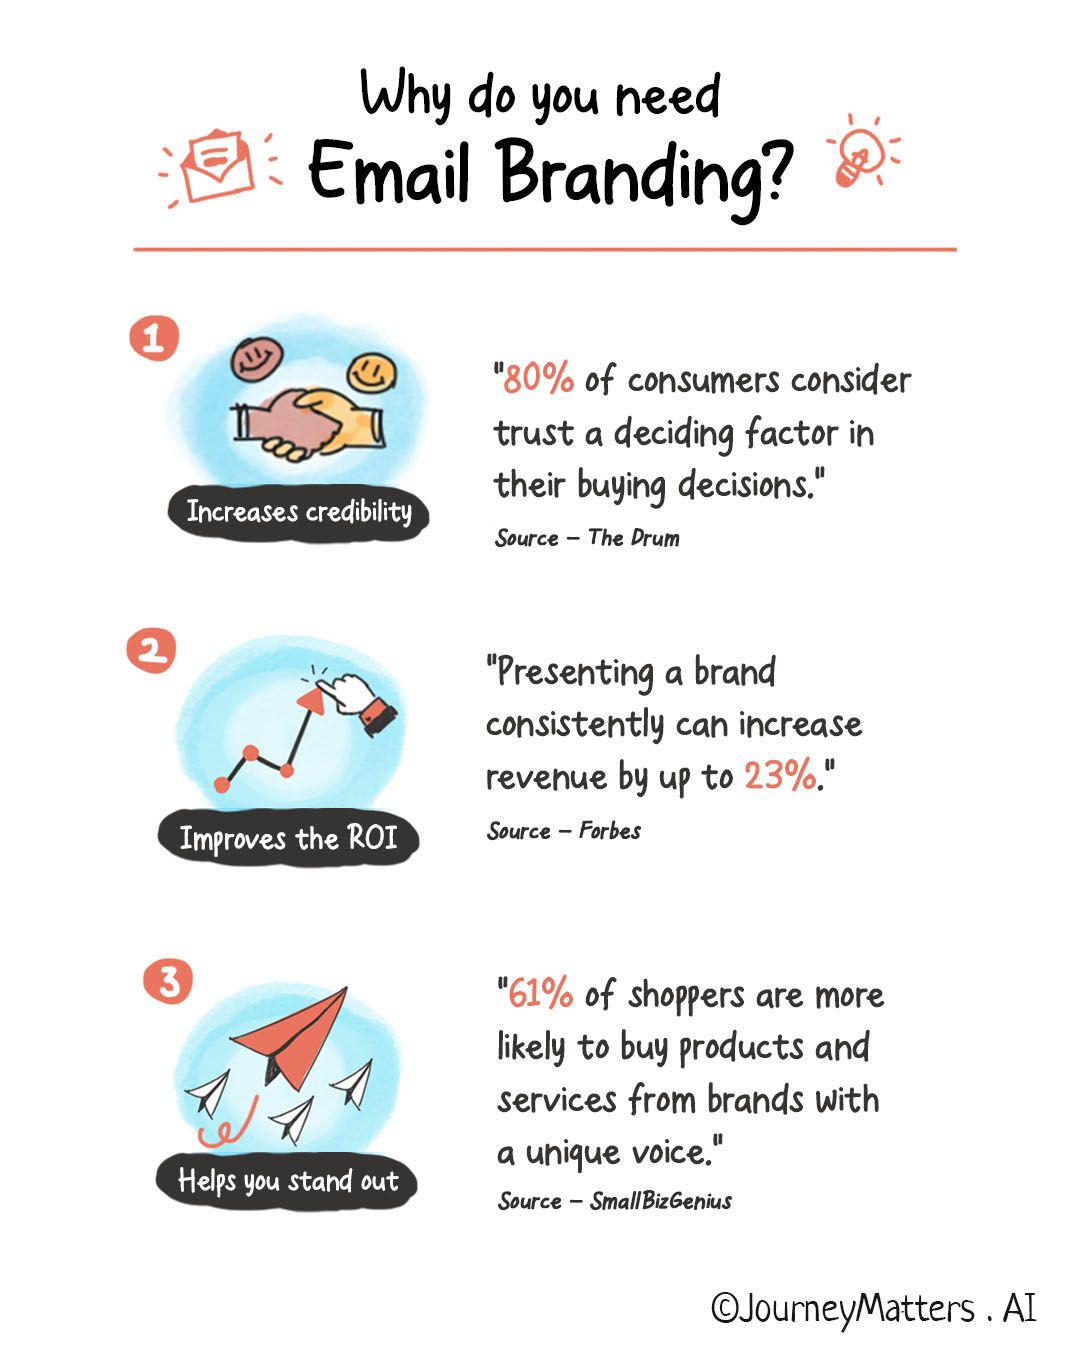 Reasons why you need email branding.